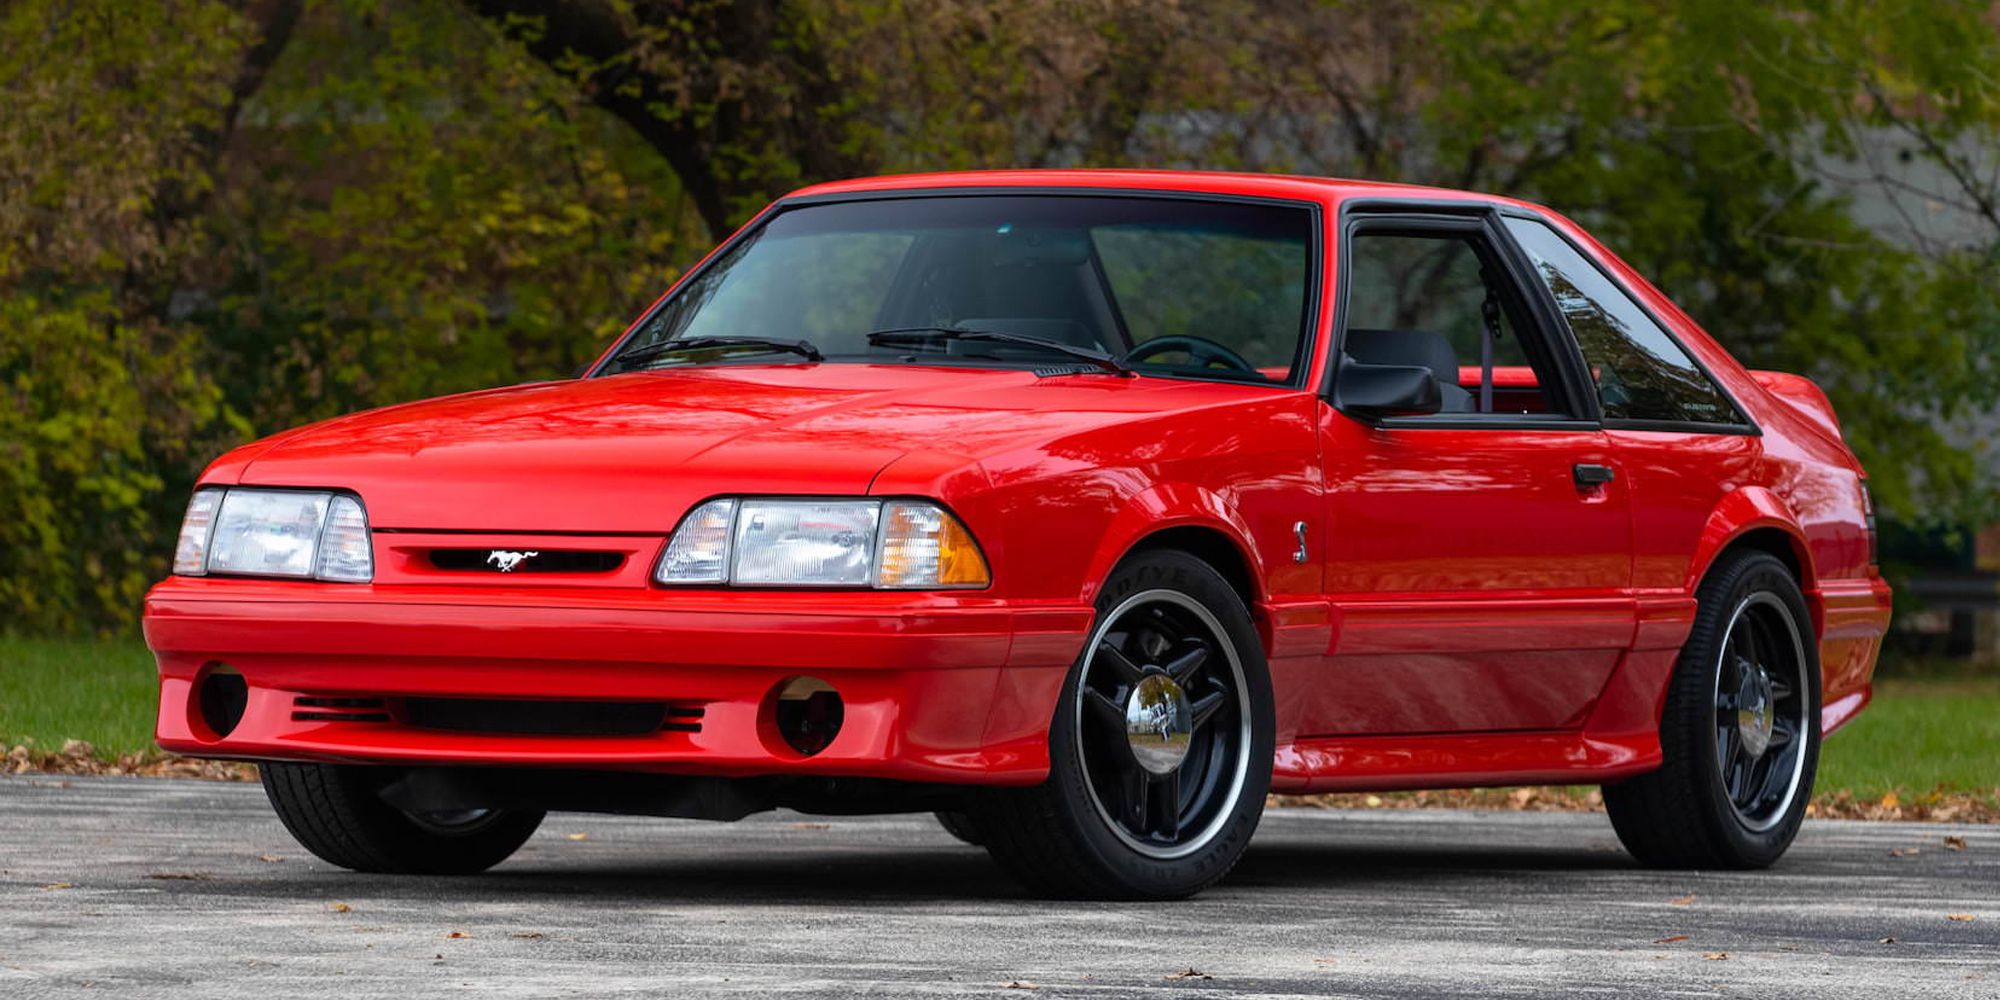 The front of the Fox Body Cobra